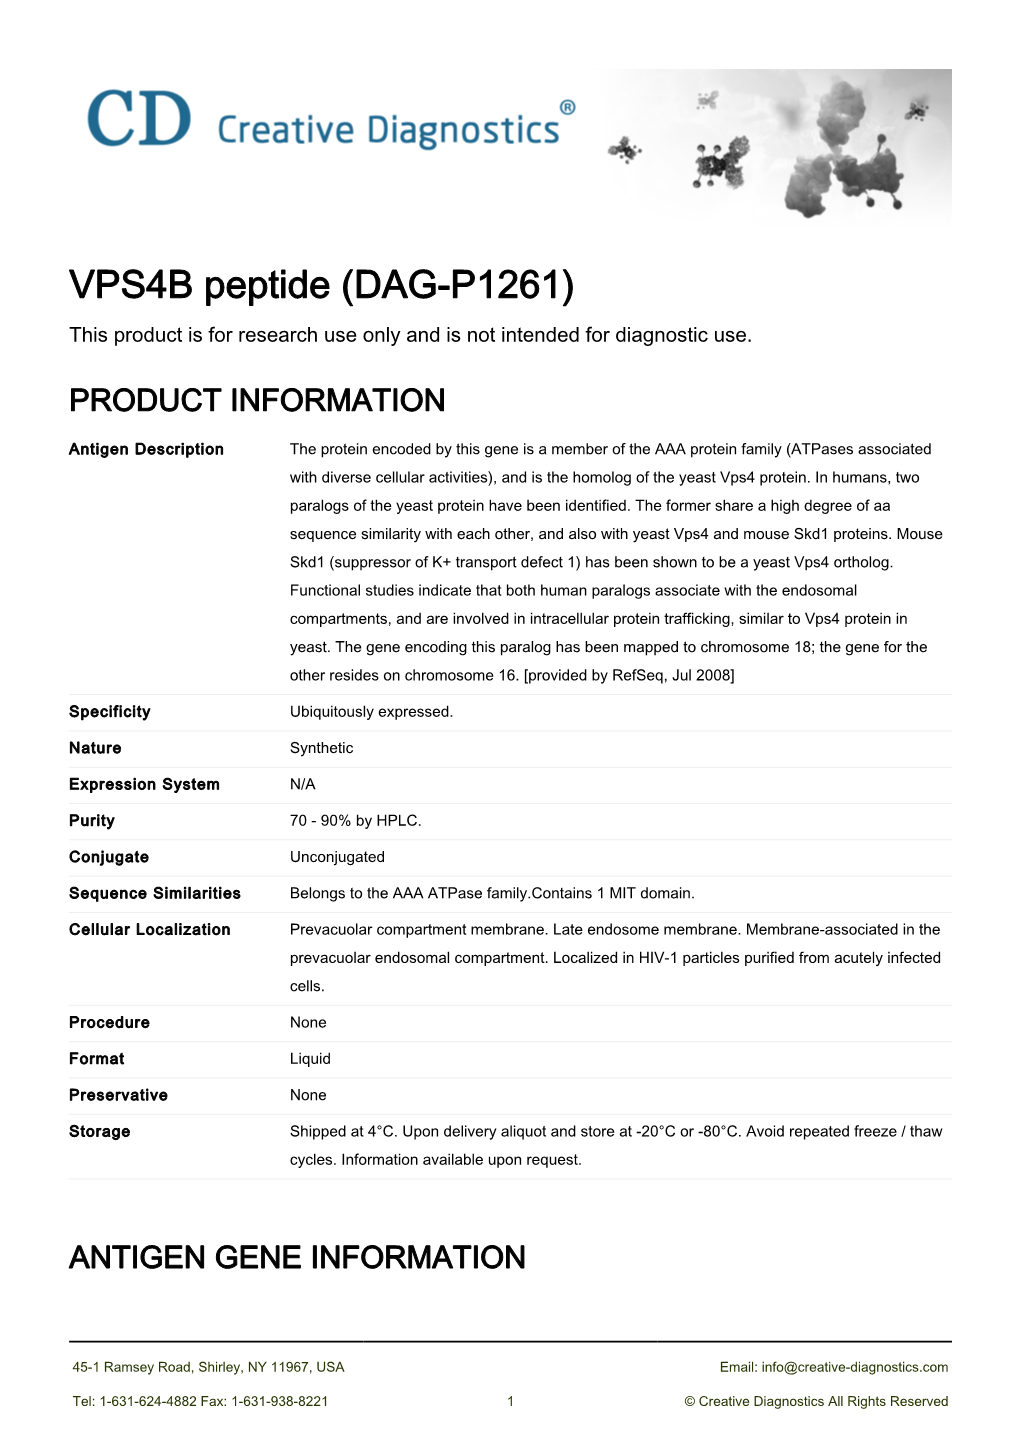 VPS4B Peptide (DAG-P1261) This Product Is for Research Use Only and Is Not Intended for Diagnostic Use